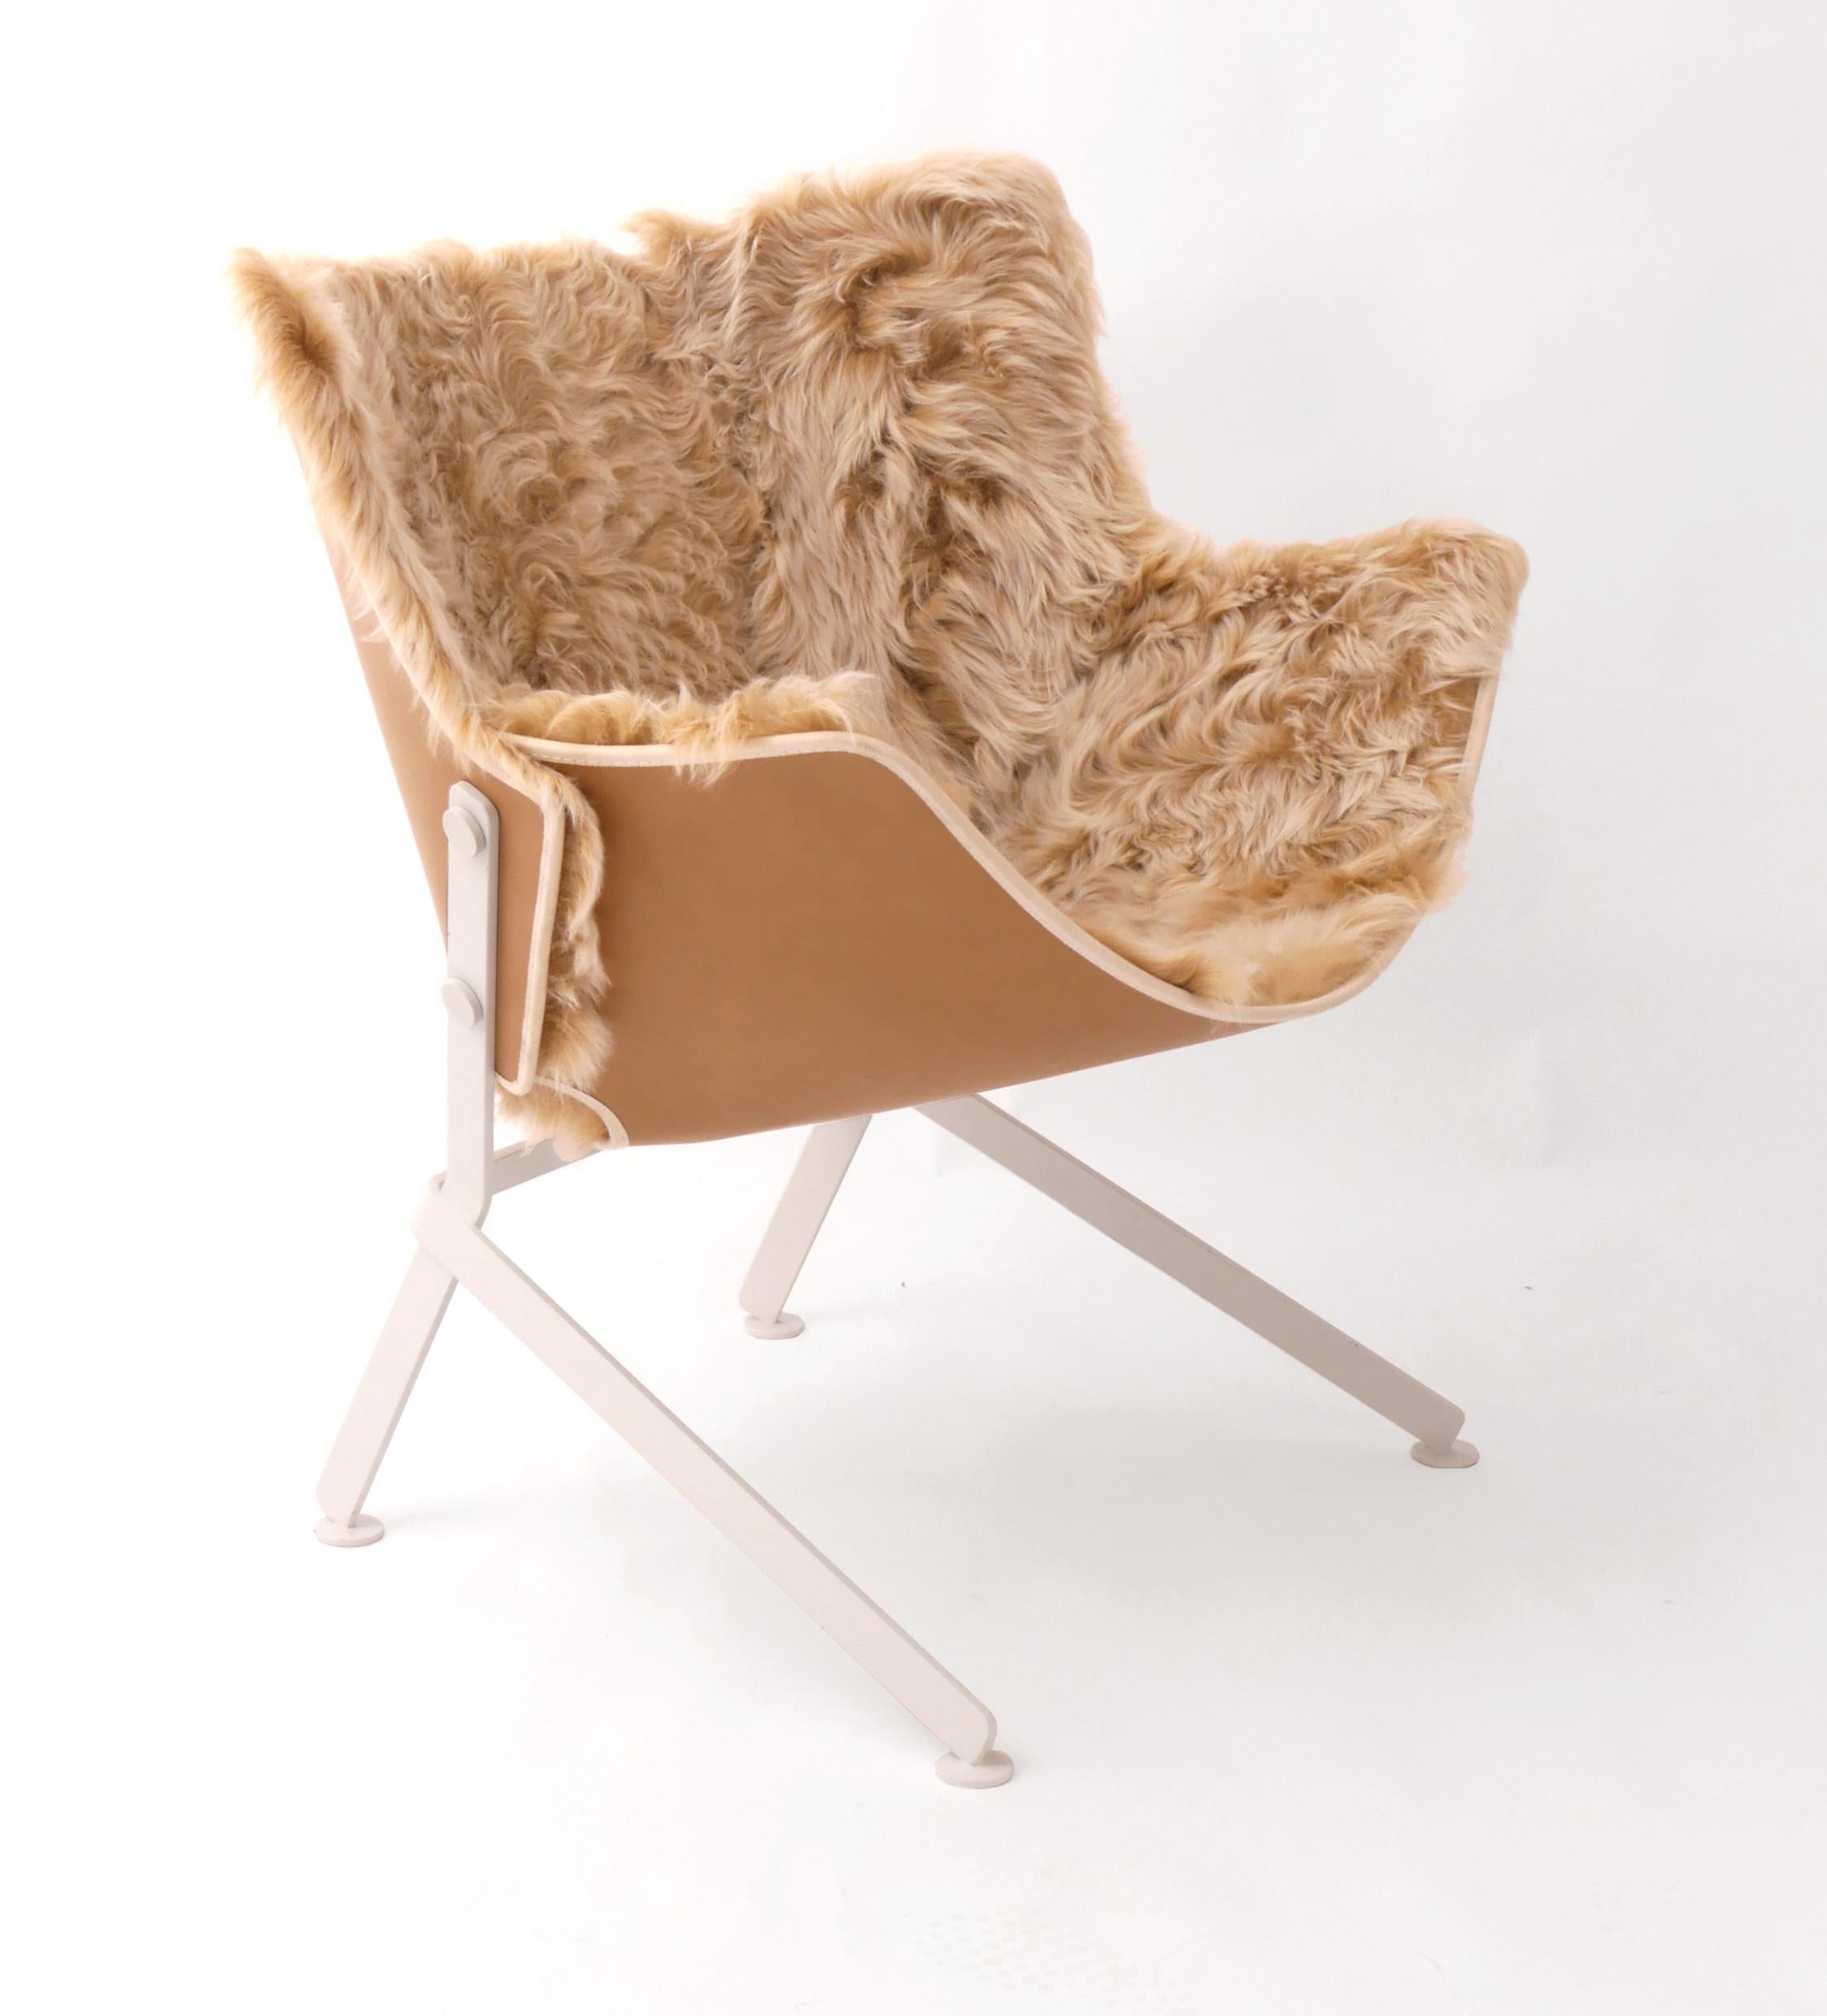 Designed by Christophe de la Fontaine, this piece is structured in powder-coat painted steel. The seat is offered in a variety of standard fur color options, and can also be produced in leathers, kilim or Mongolian fur.